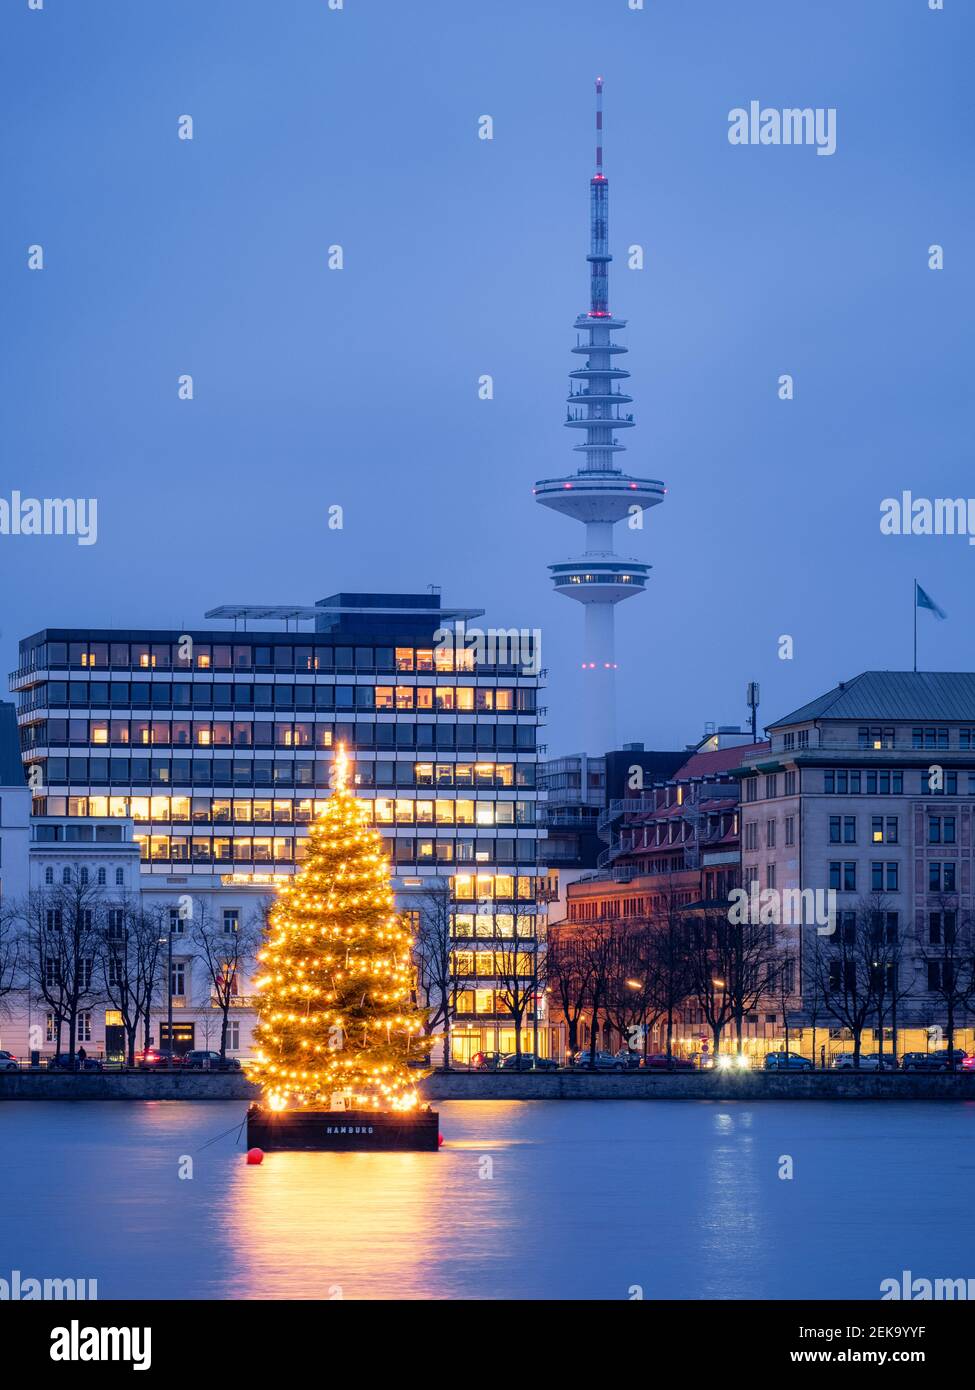 Germany, Hamburg, Inner Alster, Heinrich Hertz Tower, Lake and city view with Christmas decorations Stock Photo